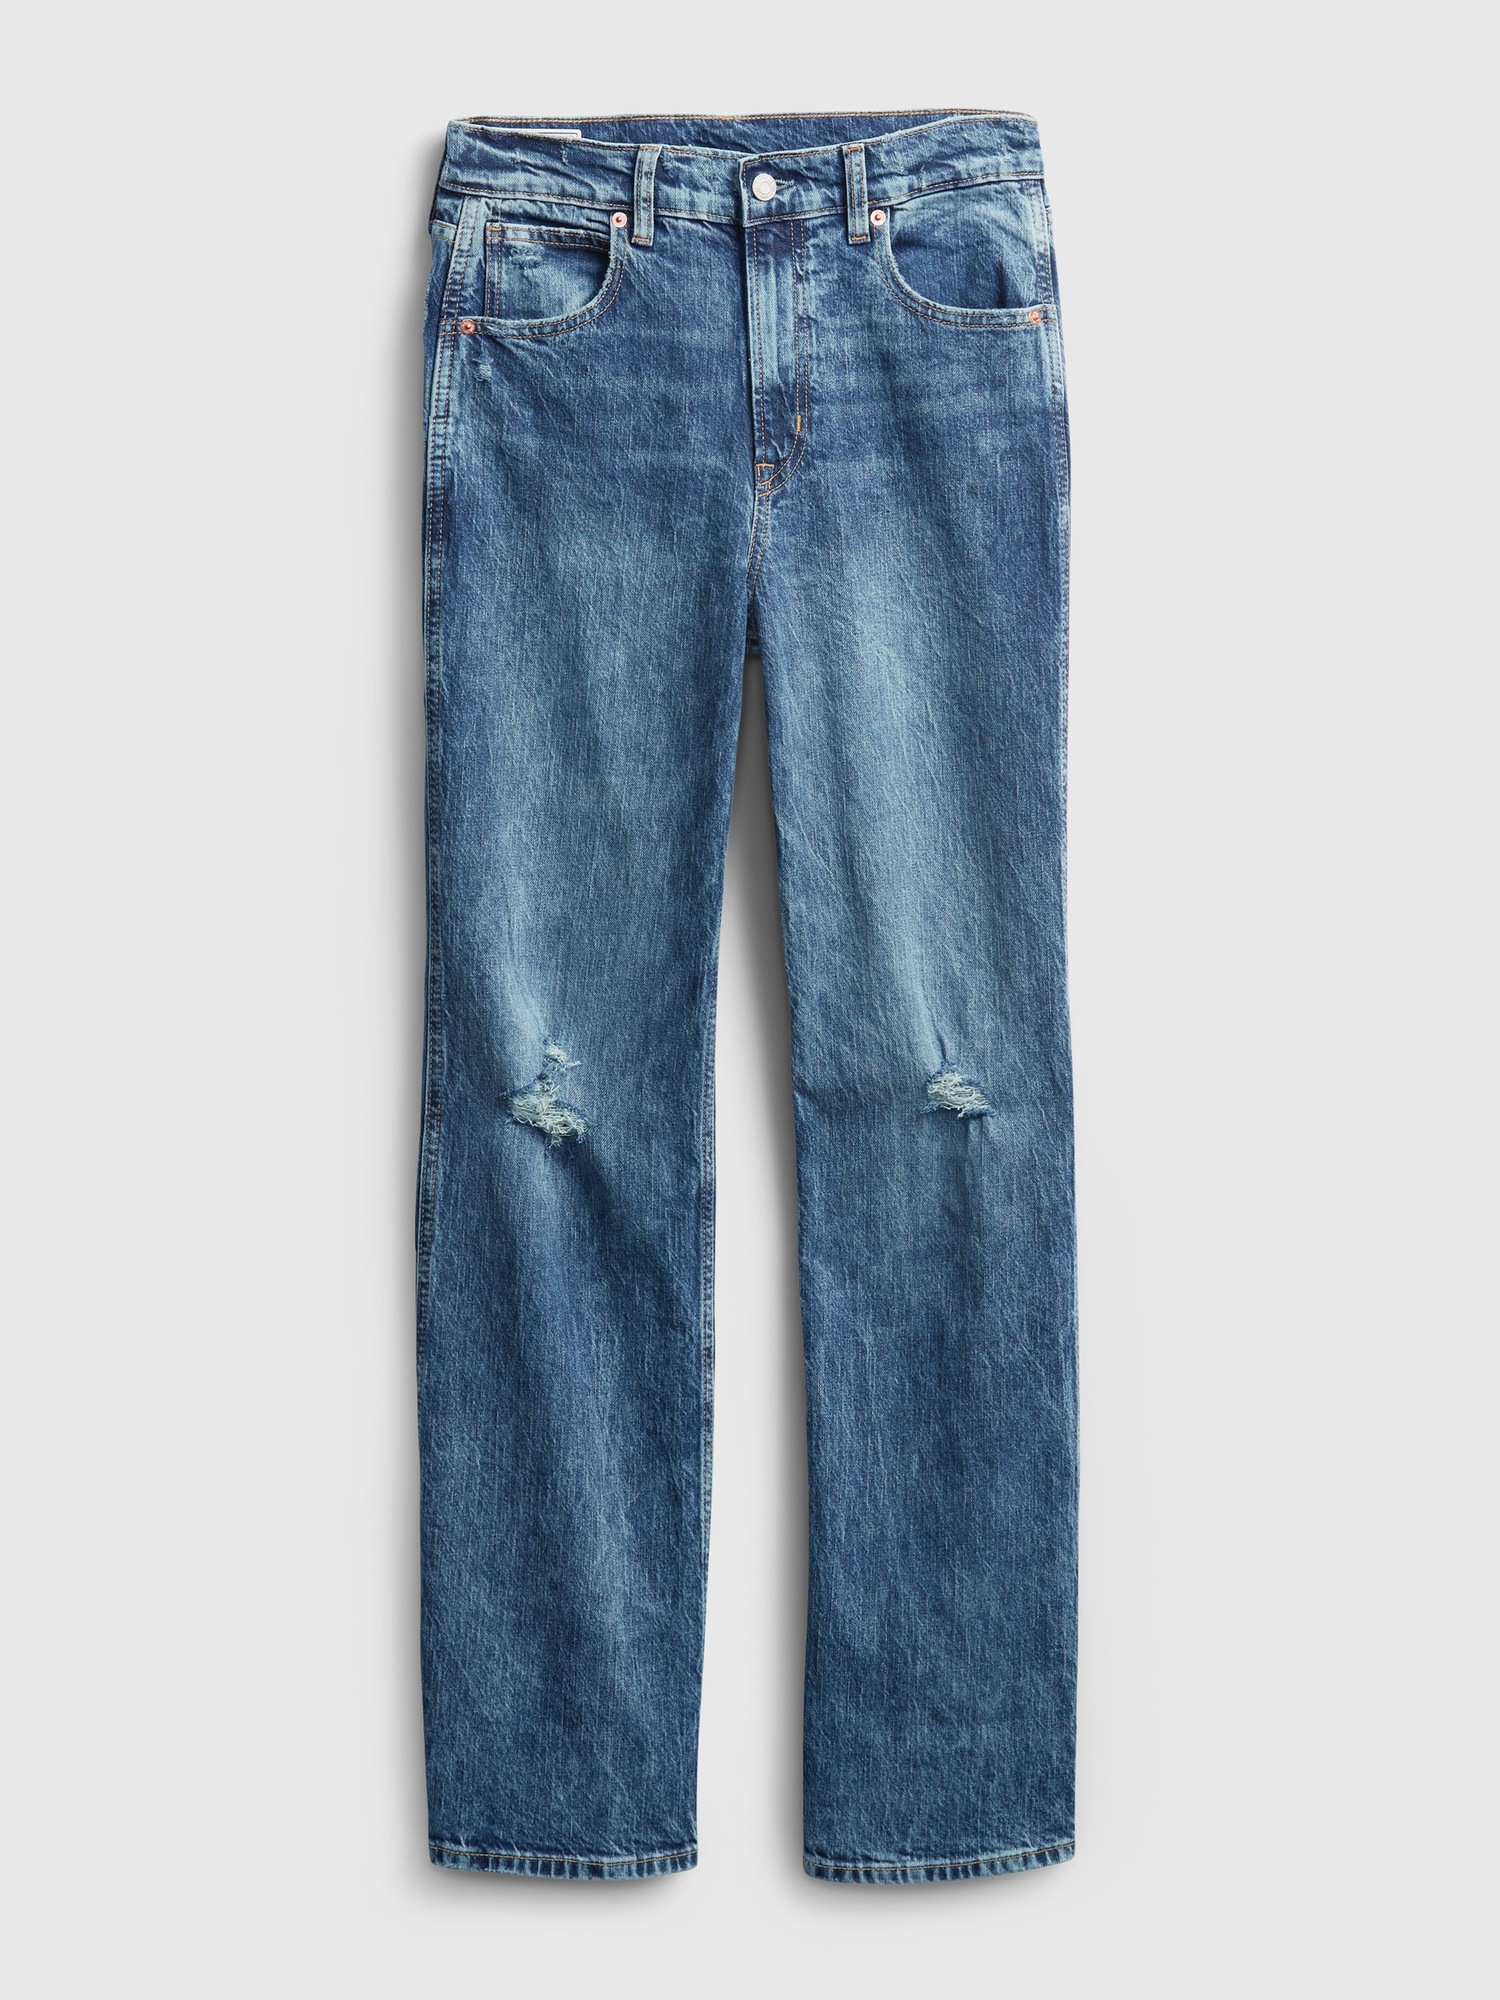 High-Rise Flare Trousers Jeans Vintage Destroyed Ripped Denim